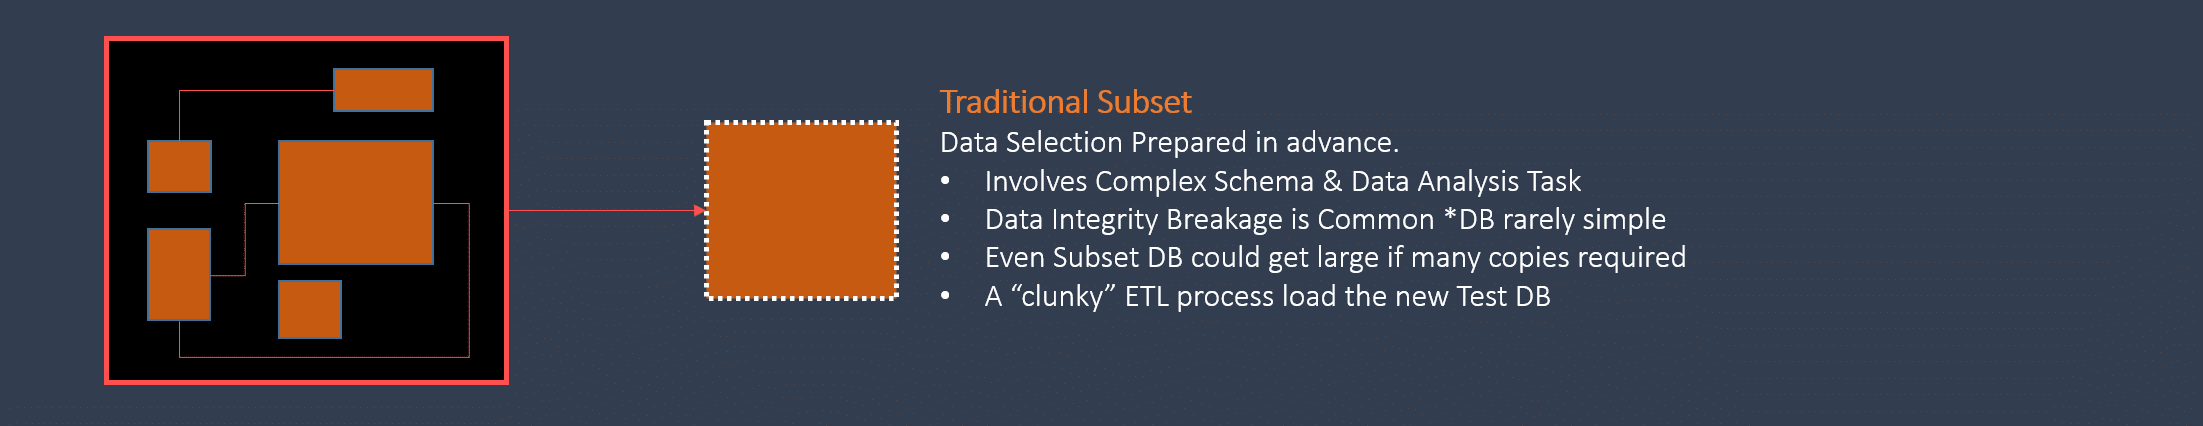 Traditional Data Subsetting